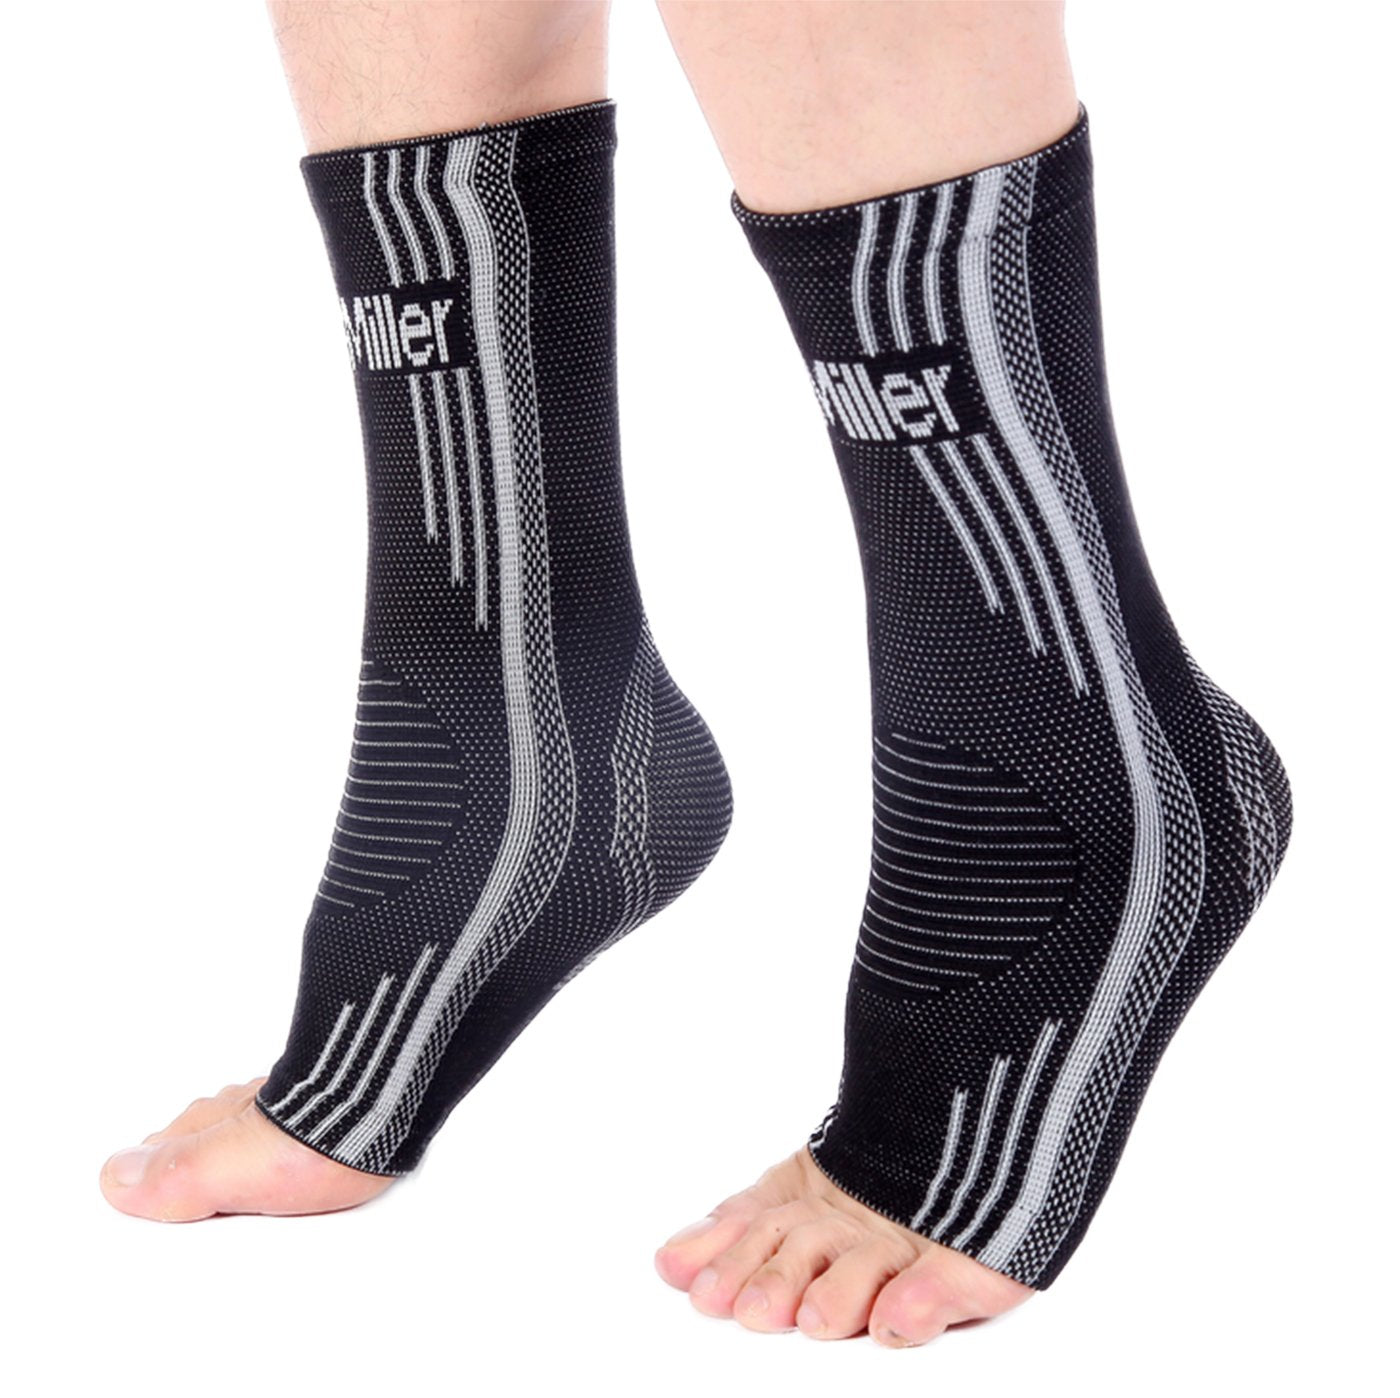 Ankle Brace Compression Sleeve - Relieves Achilles Tendonitis, Joint Pain.  Plantar Fasciitis Foot Sock with Arch Support Reduces Swelling & Heel Spur  Pain. Injury Recovery for Sports - Walmart.com